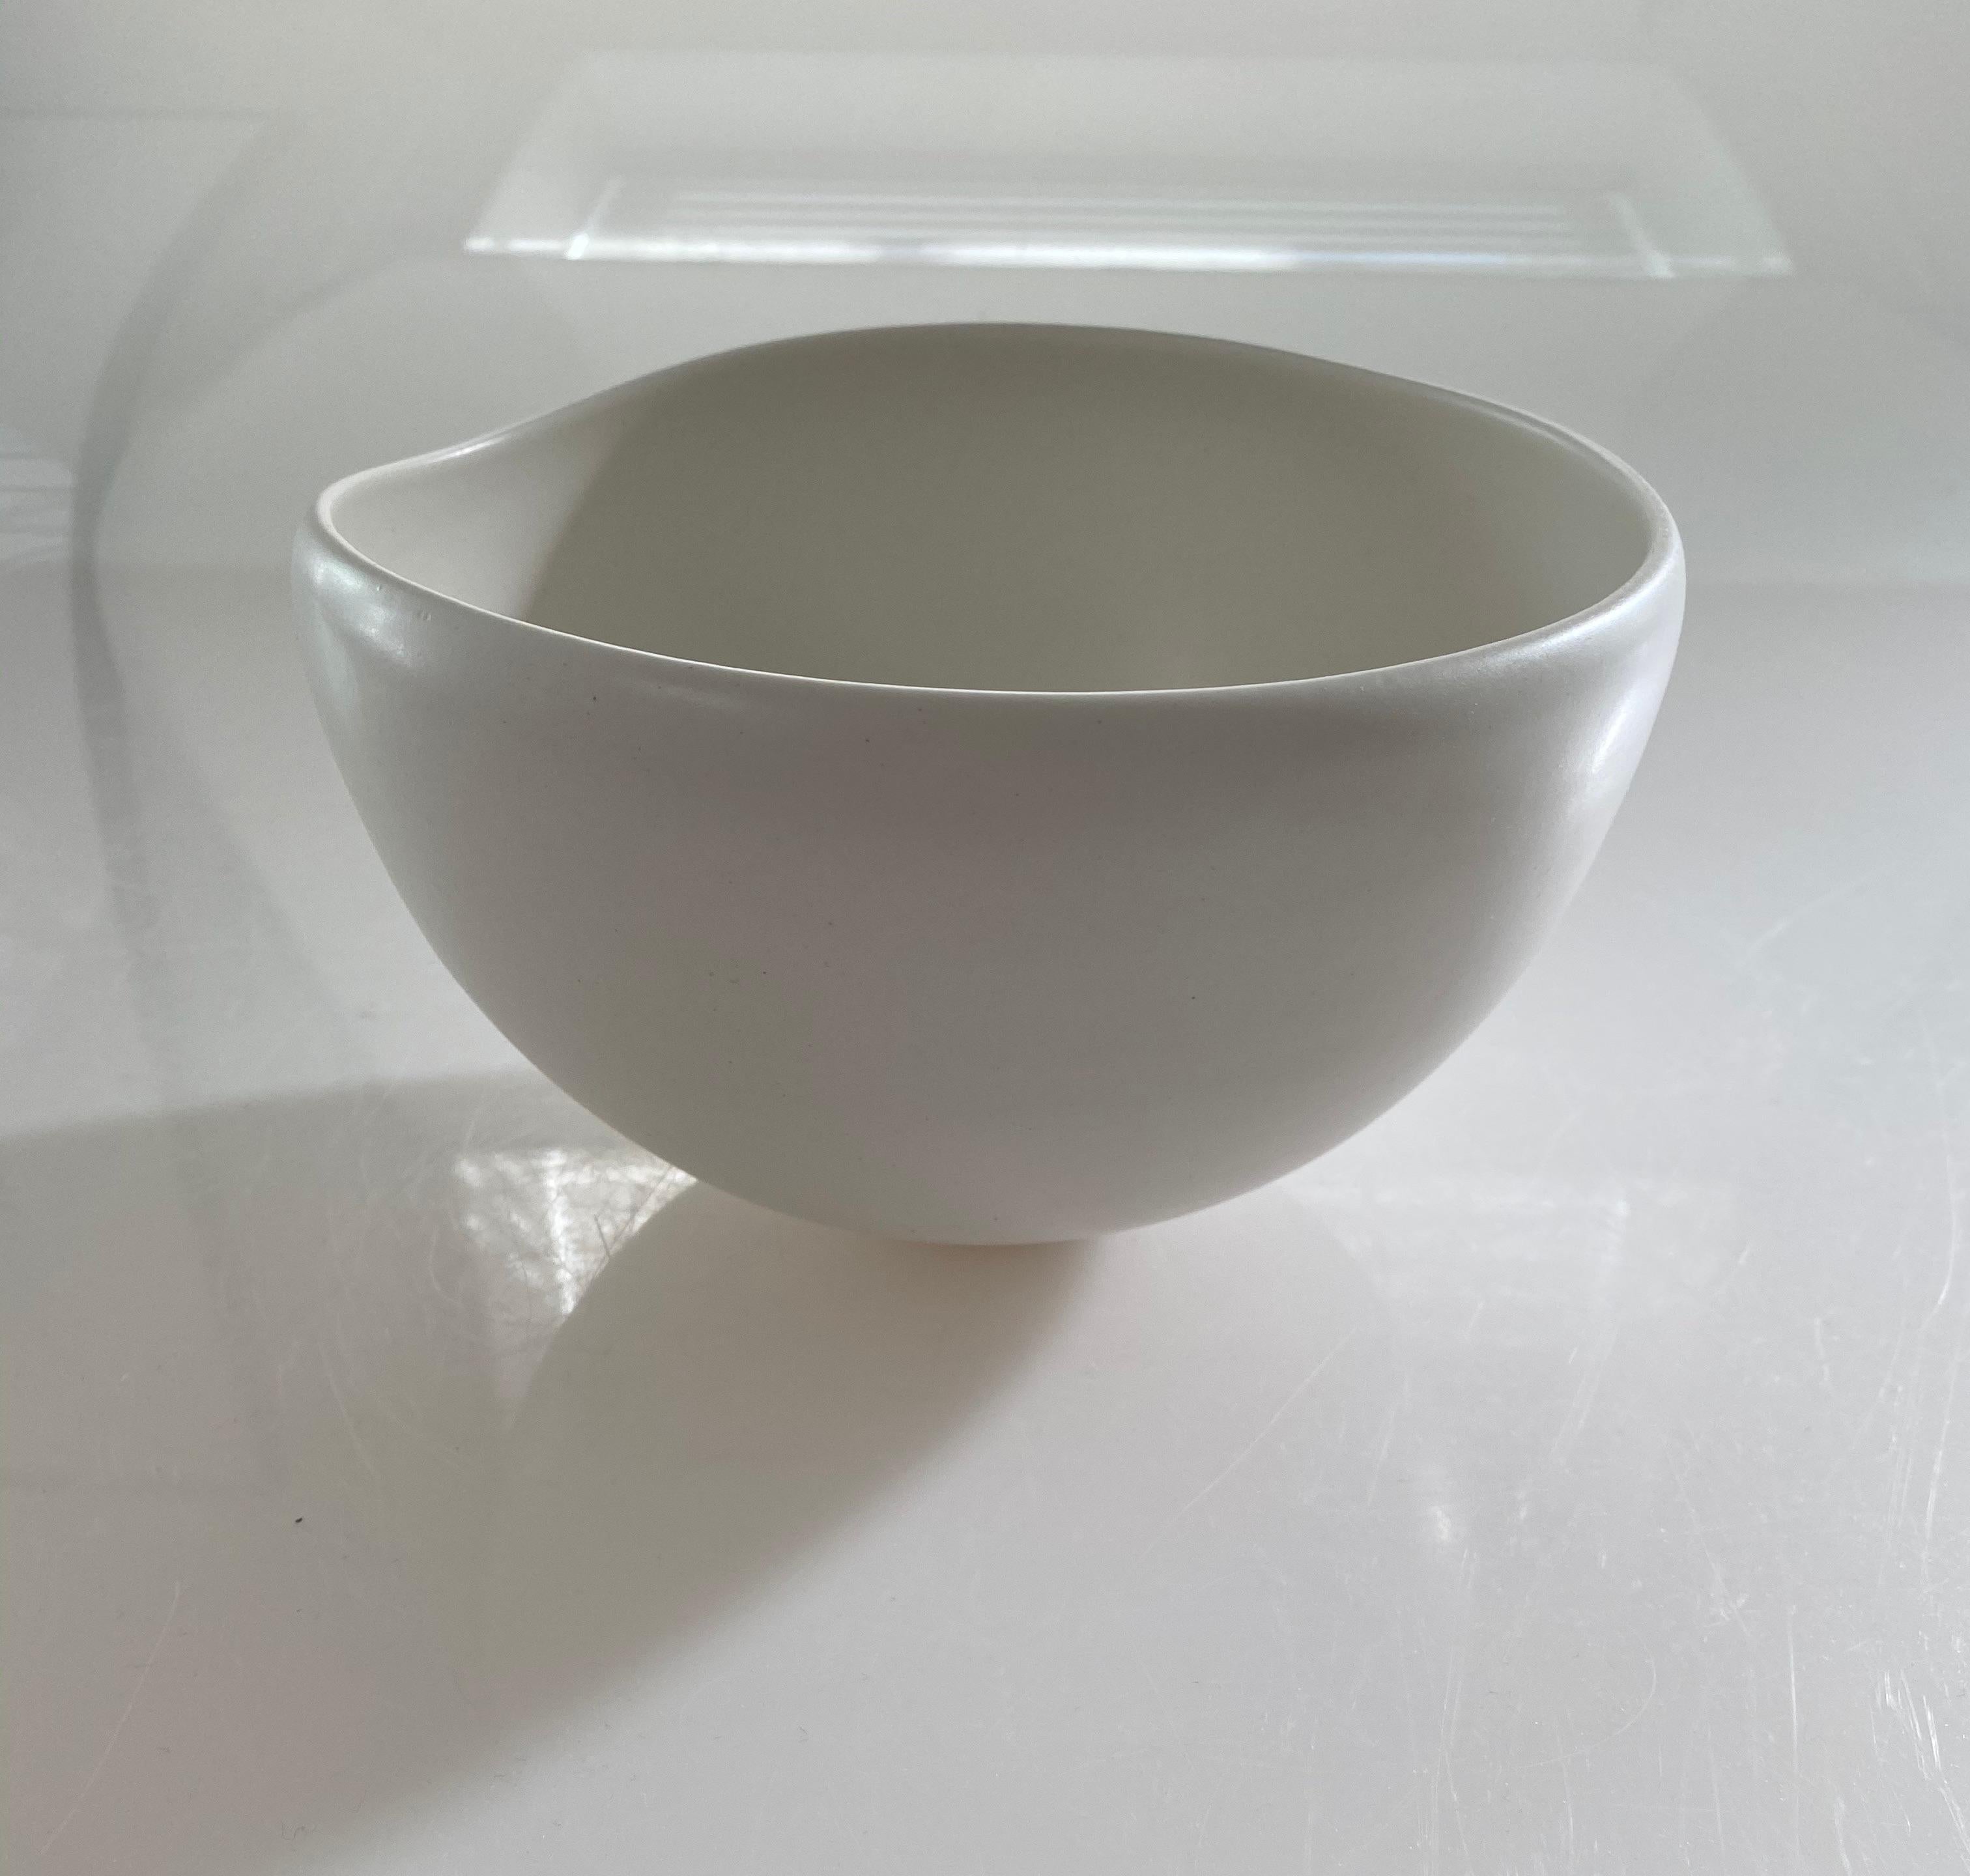 North American White Alabaster Glazed Spouted Bowl, USA, Contemporary